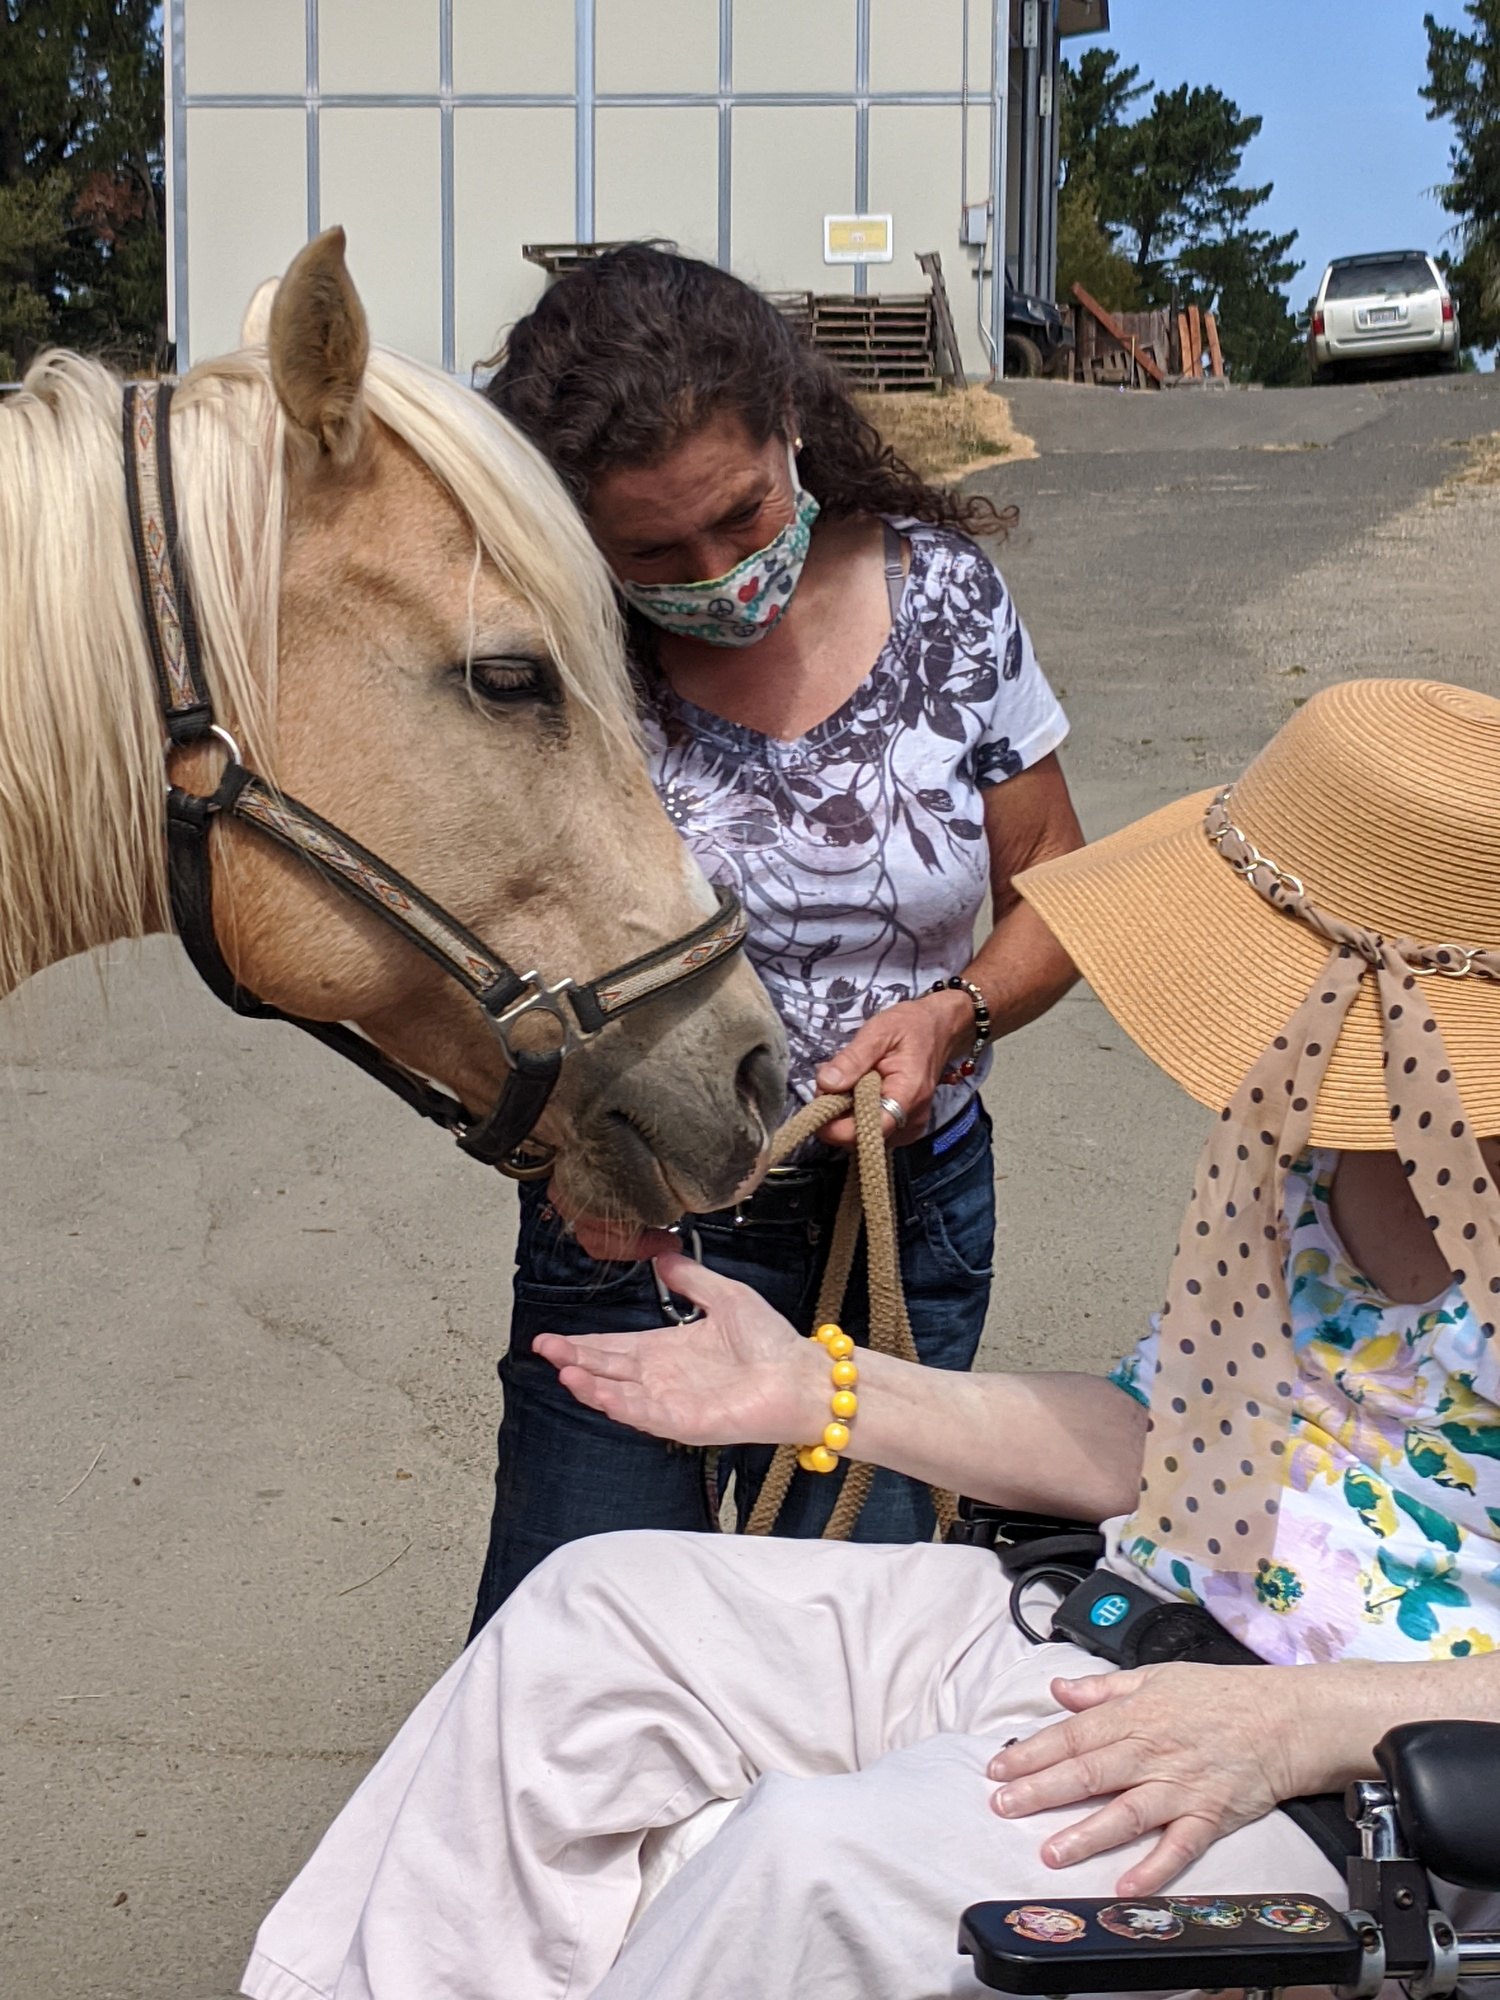 A woman with long, wavy brown hair wears a covid-19 mask, a white and purple floral shirt, and jeans as she introduces a blonde horse to a woman wearing a tan floppy sun hat, purple and green floral shirt, and white pants seated in a wheelchair. 